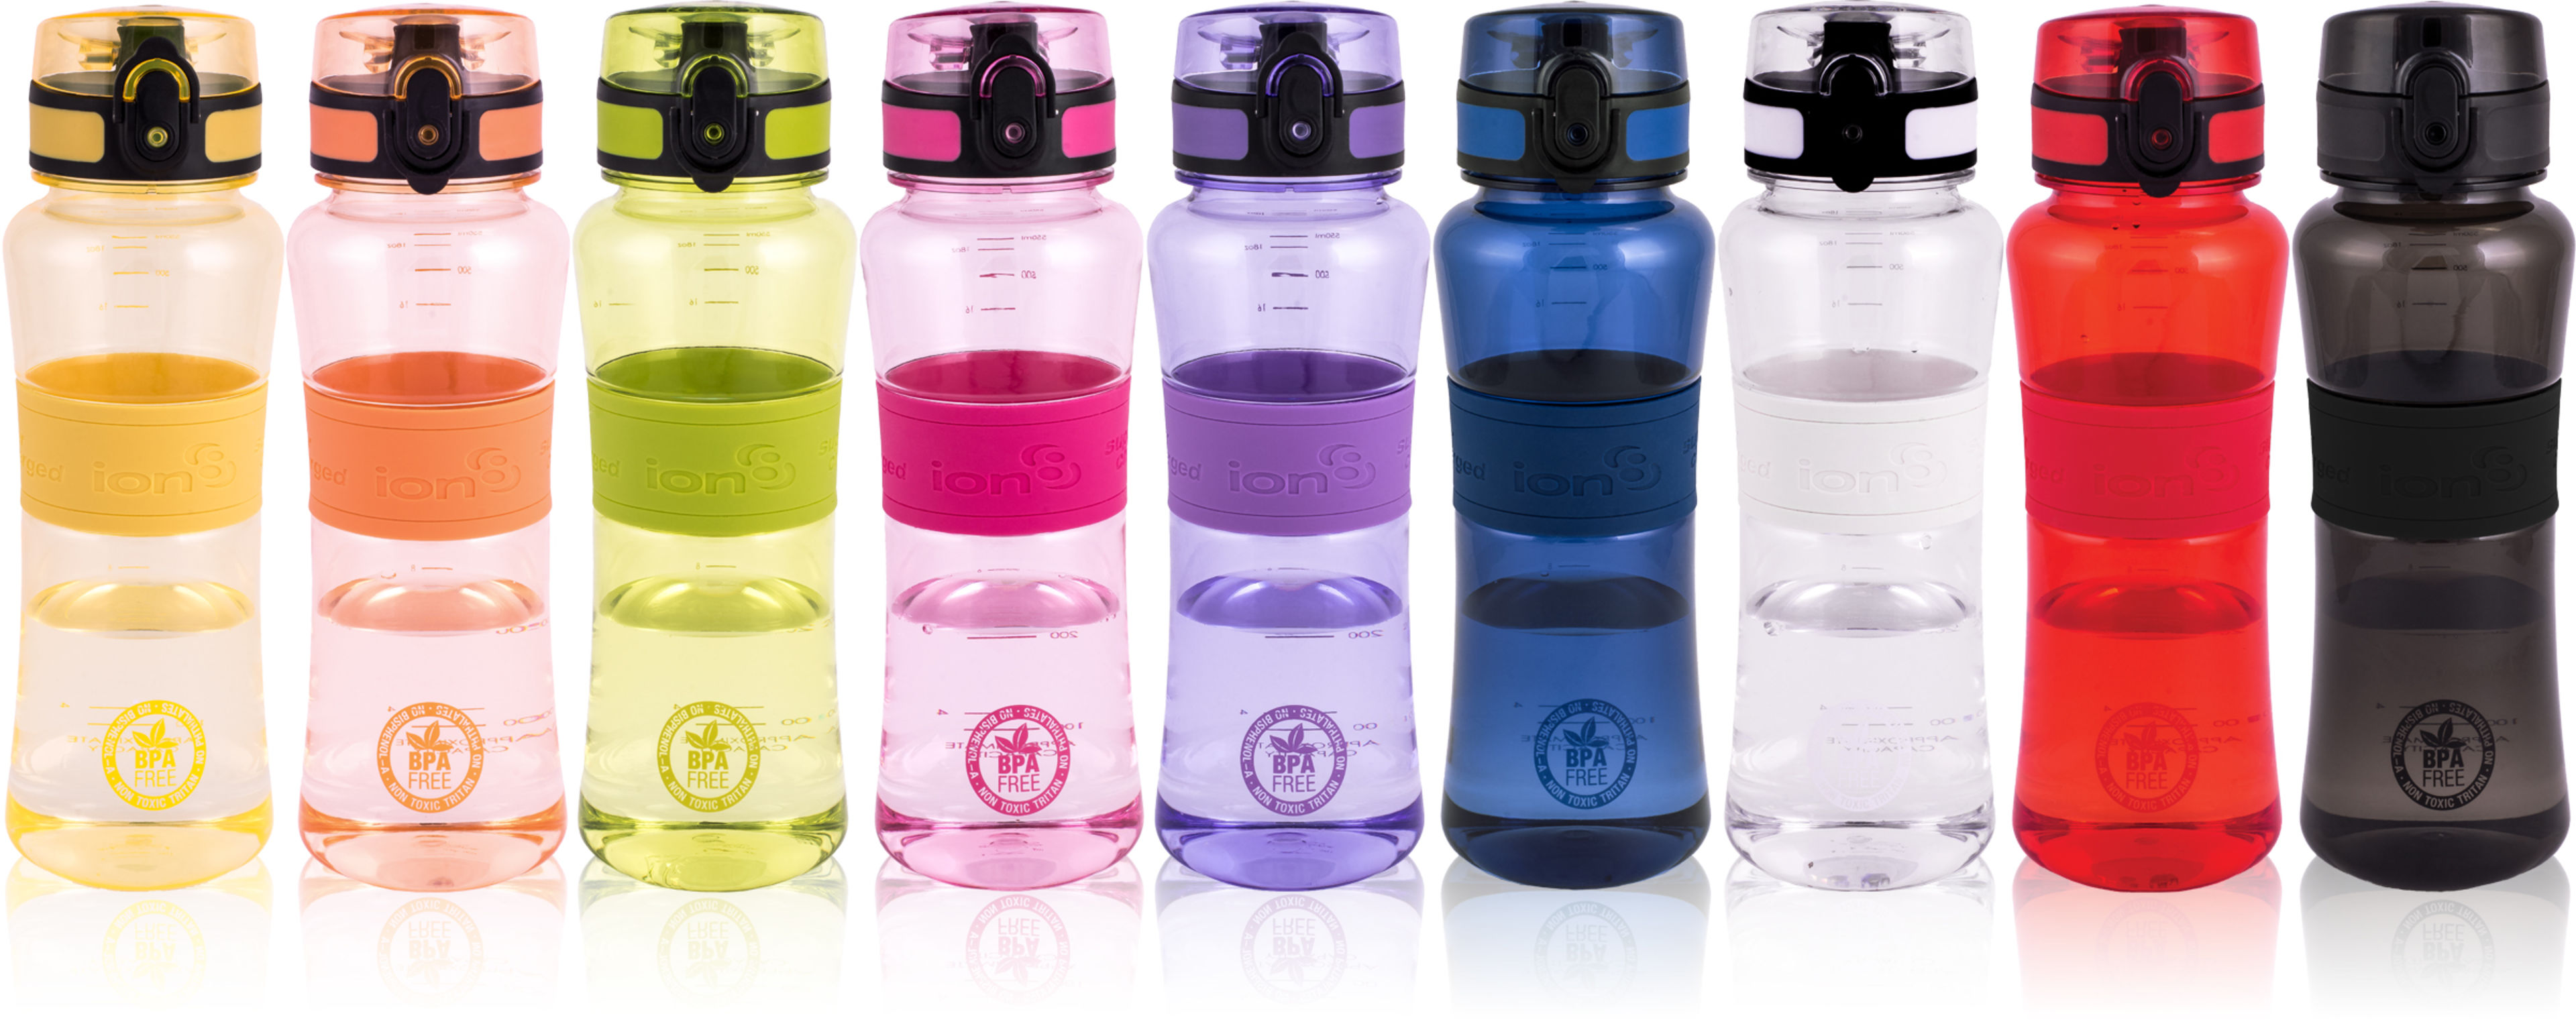 Water Bottles - ION8